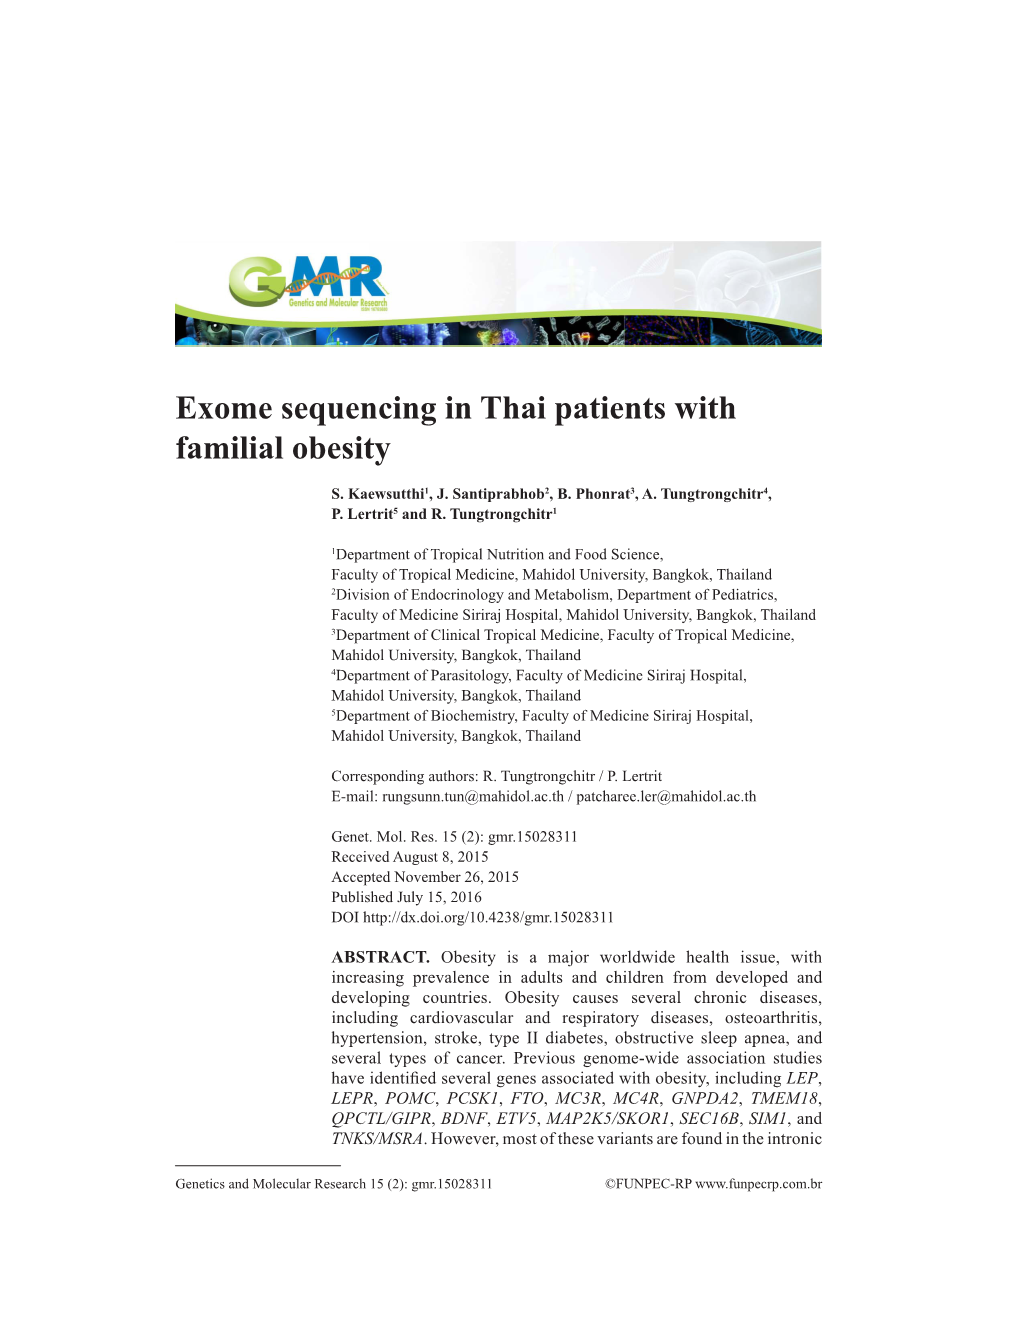 Exome Sequencing in Thai Patients with Familial Obesity